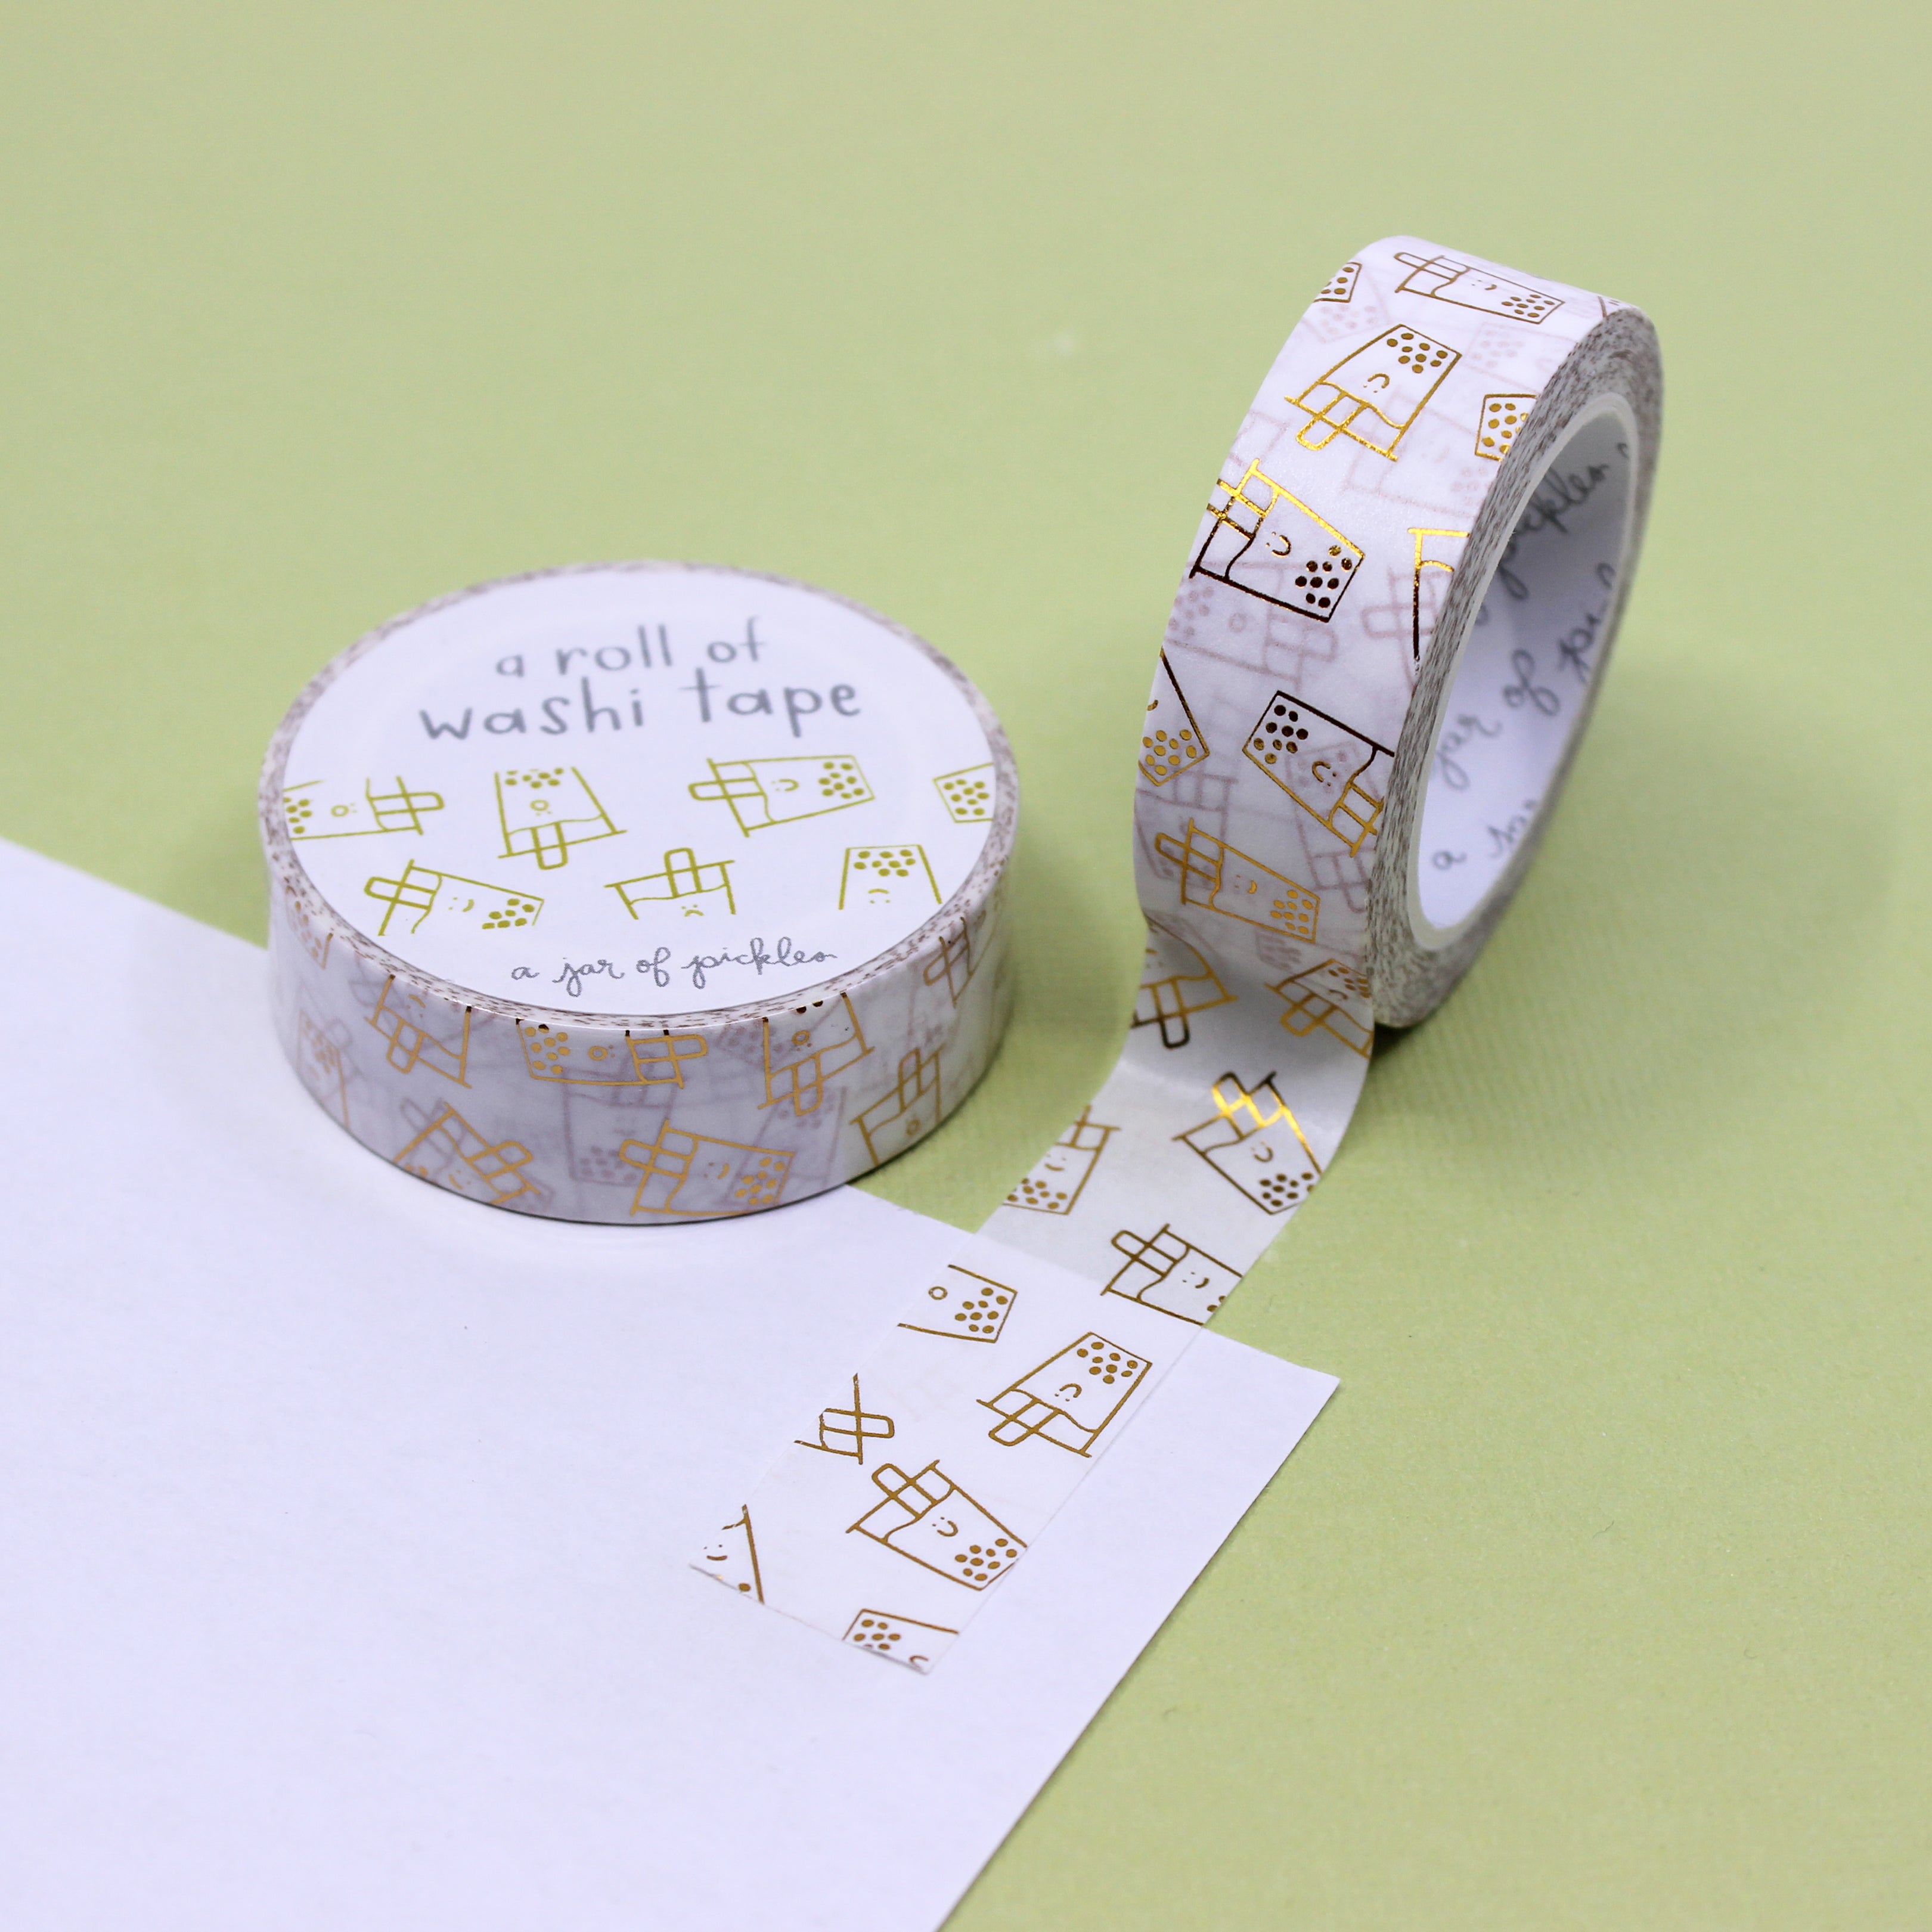 Gold Foil Boba Love Washi Tape adds a touch of elegance and fun to your projects. With its golden accents and charming boba designs, this tape is perfect for adding a playful yet sophisticated look to your crafts, scrapbooks, and more. This tape is from A Jar of Pickles and sold at BBB Supplies Craft Shop.